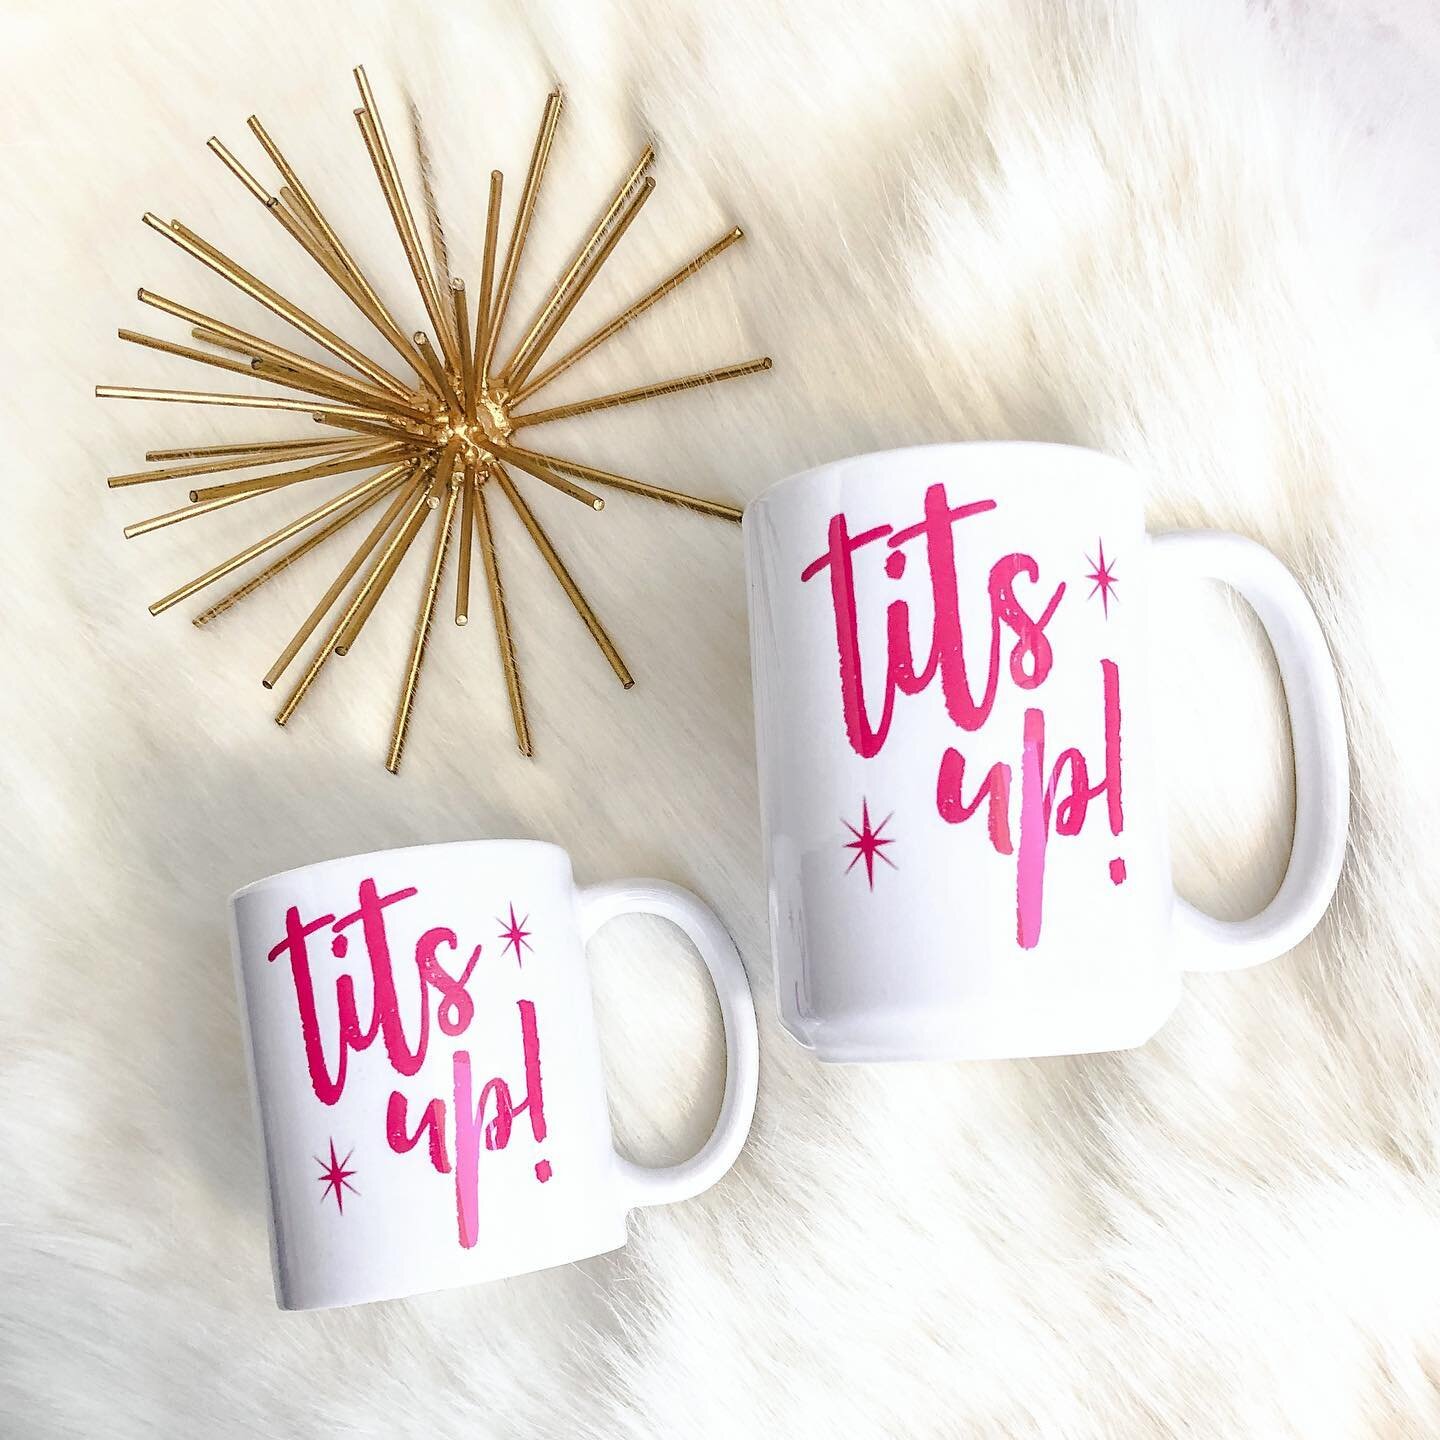 I&rsquo;m celebrating small business Saturday a super secret sale of my most popular mugs that are no longer for sale on Etsy! Swipe to check them out! They are available through my website until Monday, November 30th at 11:59pm so get em while their